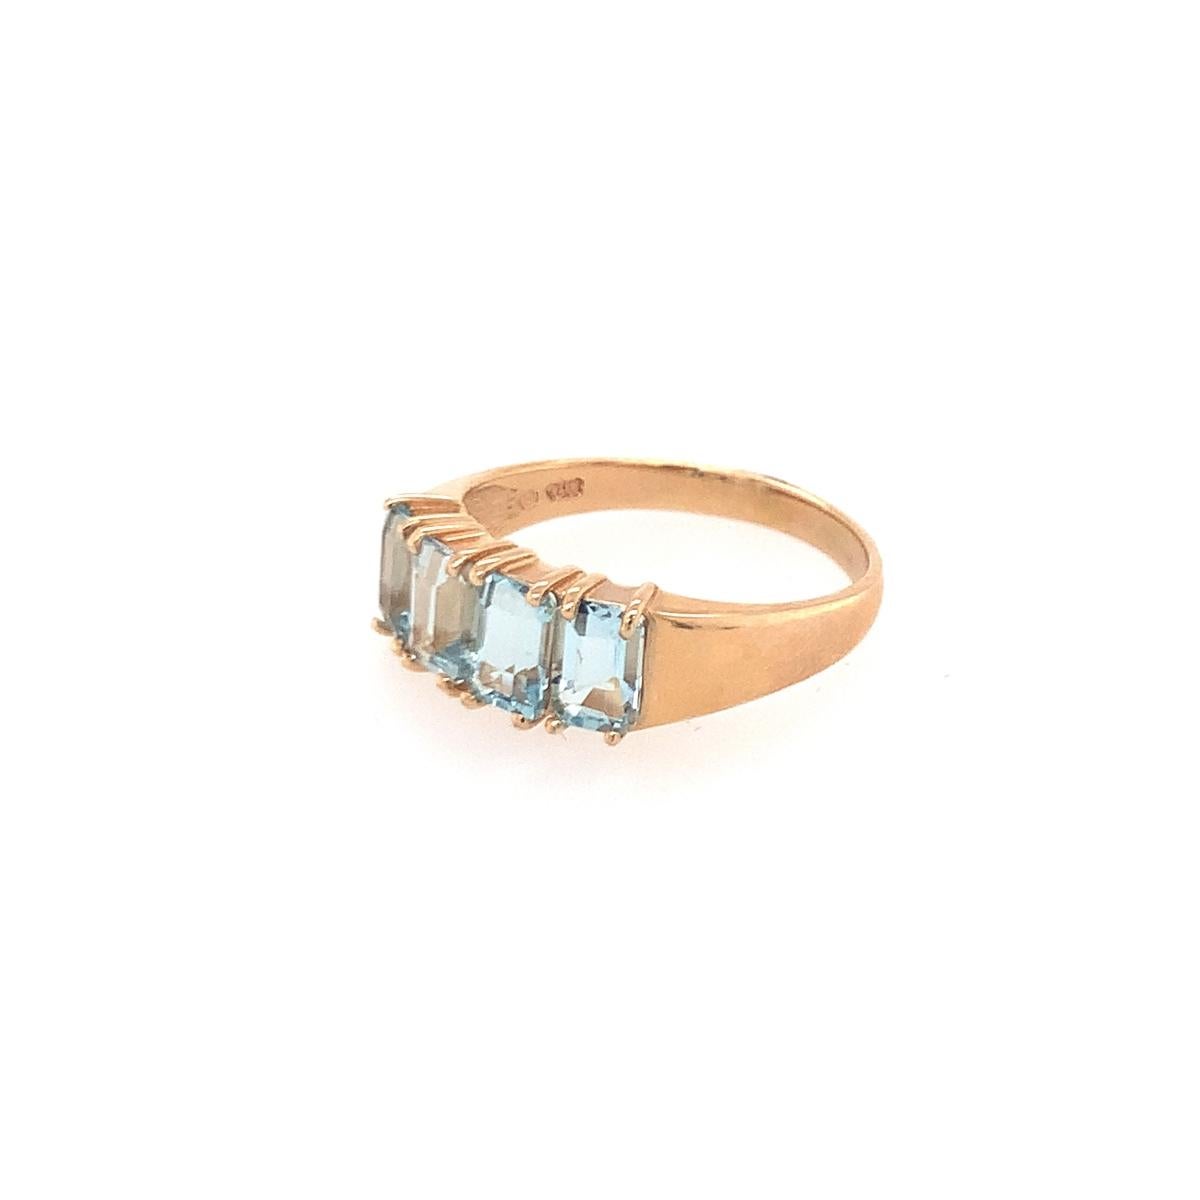 One blue topaz 14K yellow gold ring featuring four emerald cut, sky blue topaz weighing approximately 2.25 ct. in total.

Bright, airy, designer.

Additional information:
Metal: 14K yellow gold
Gemstone: Blue Topaz totaling 2.25 ct.
Circa: